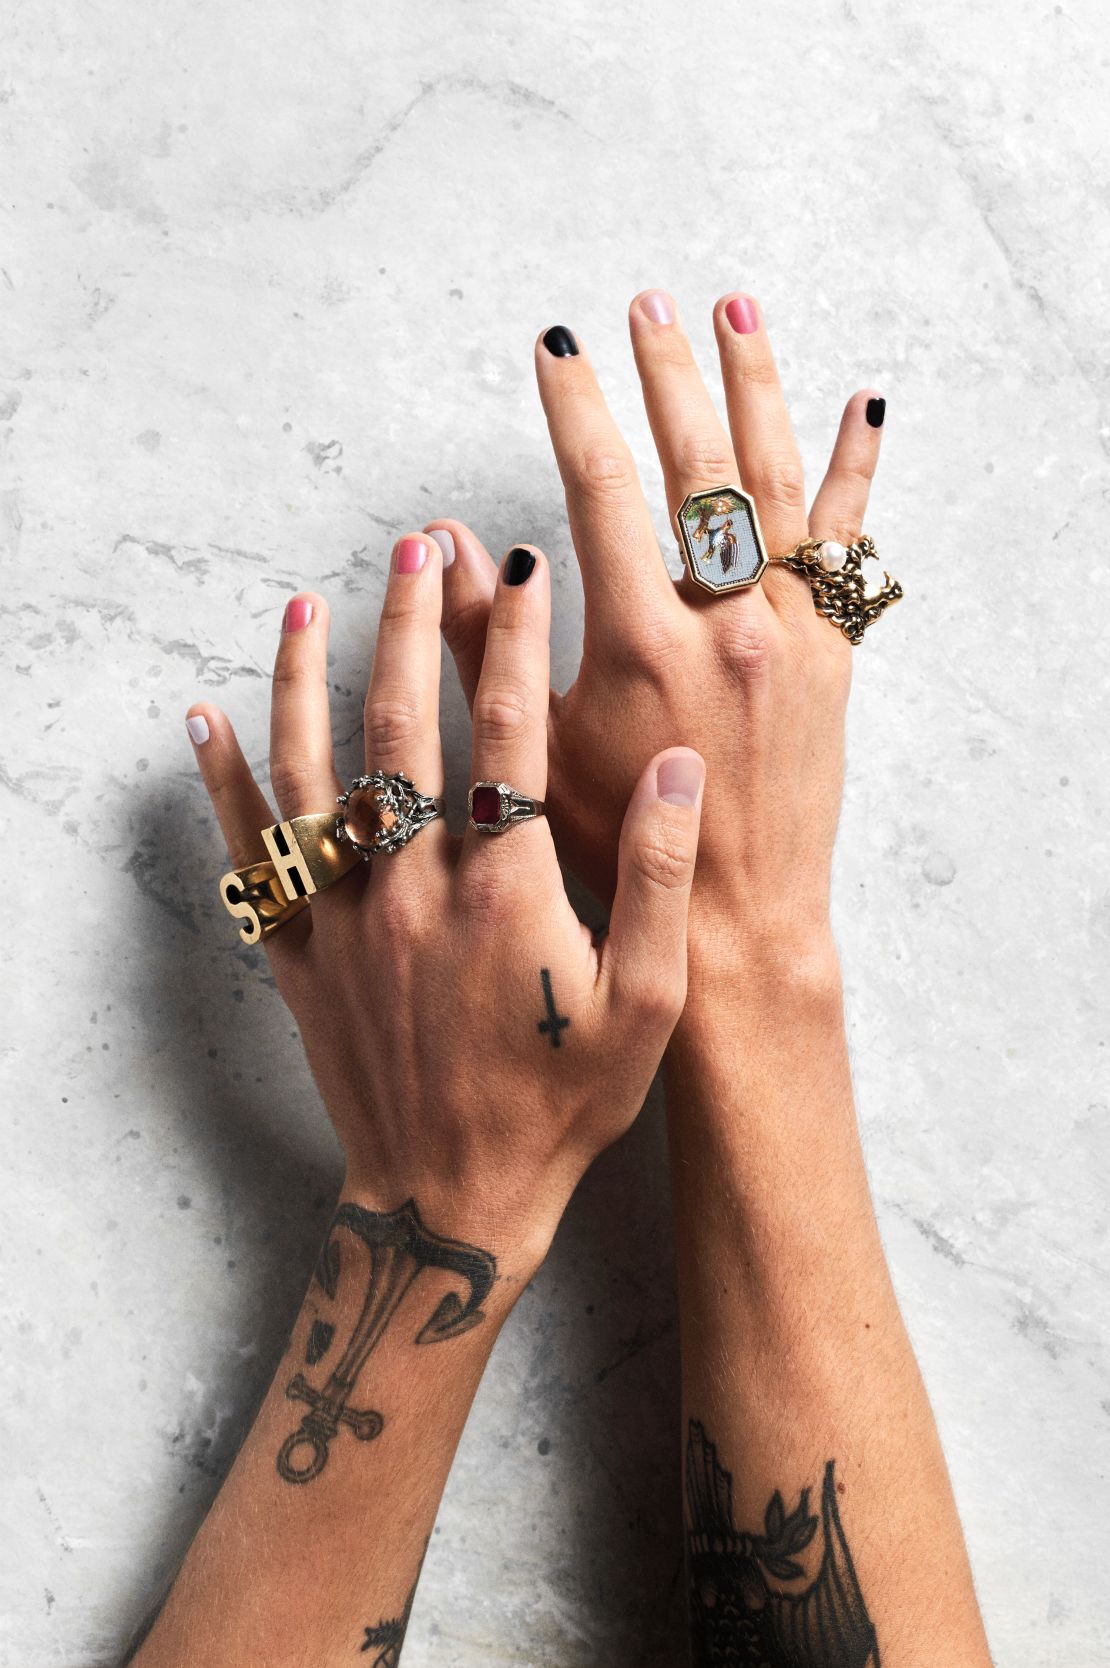 Harry Styles modeling the new range of nail polishes and his signature H and S rings.